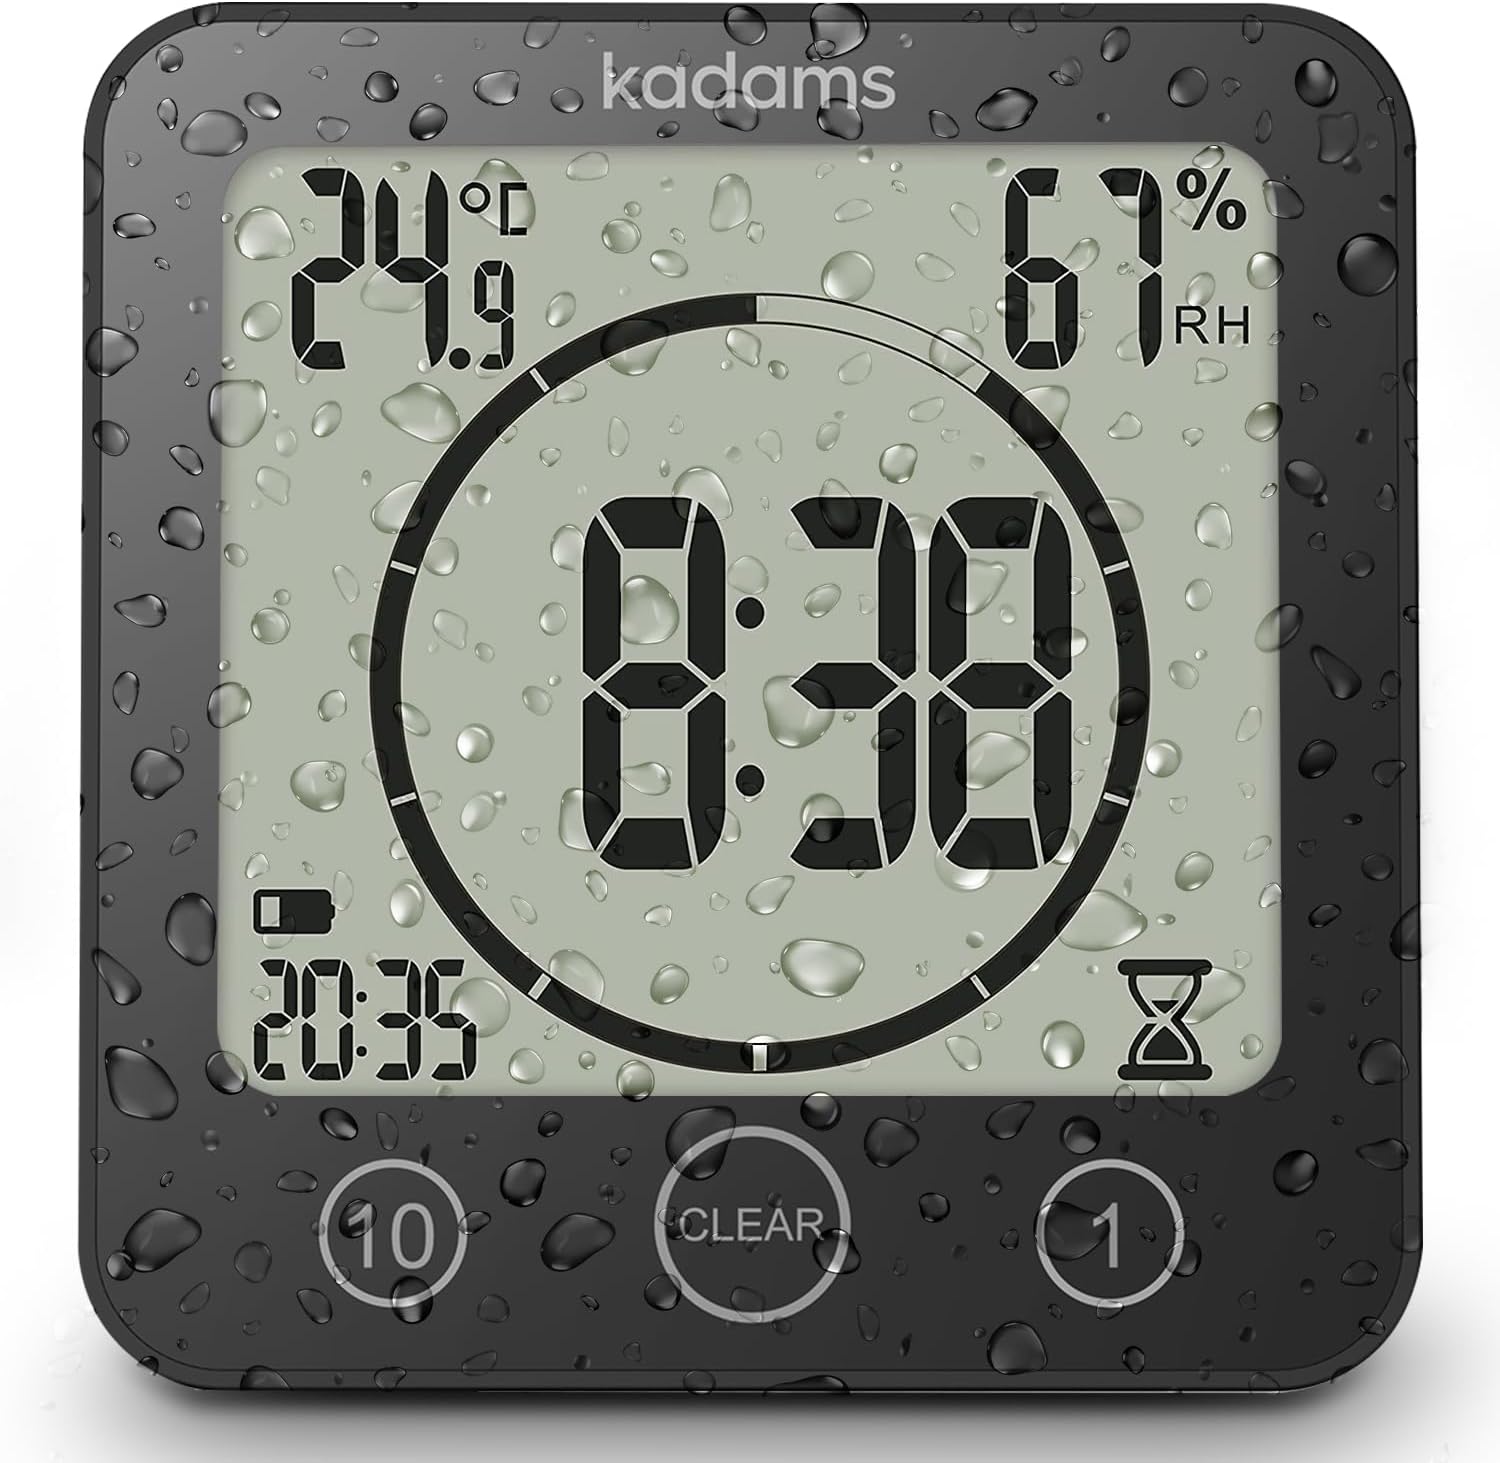 KADAMS Digital Bathroom Shower Kitchen Wall Clock Timer with Alarm, Waterproof for Water Spray, Touch Screen Timer, Temperature Humidity, Suction Cup Hanging Hole Stand - Black